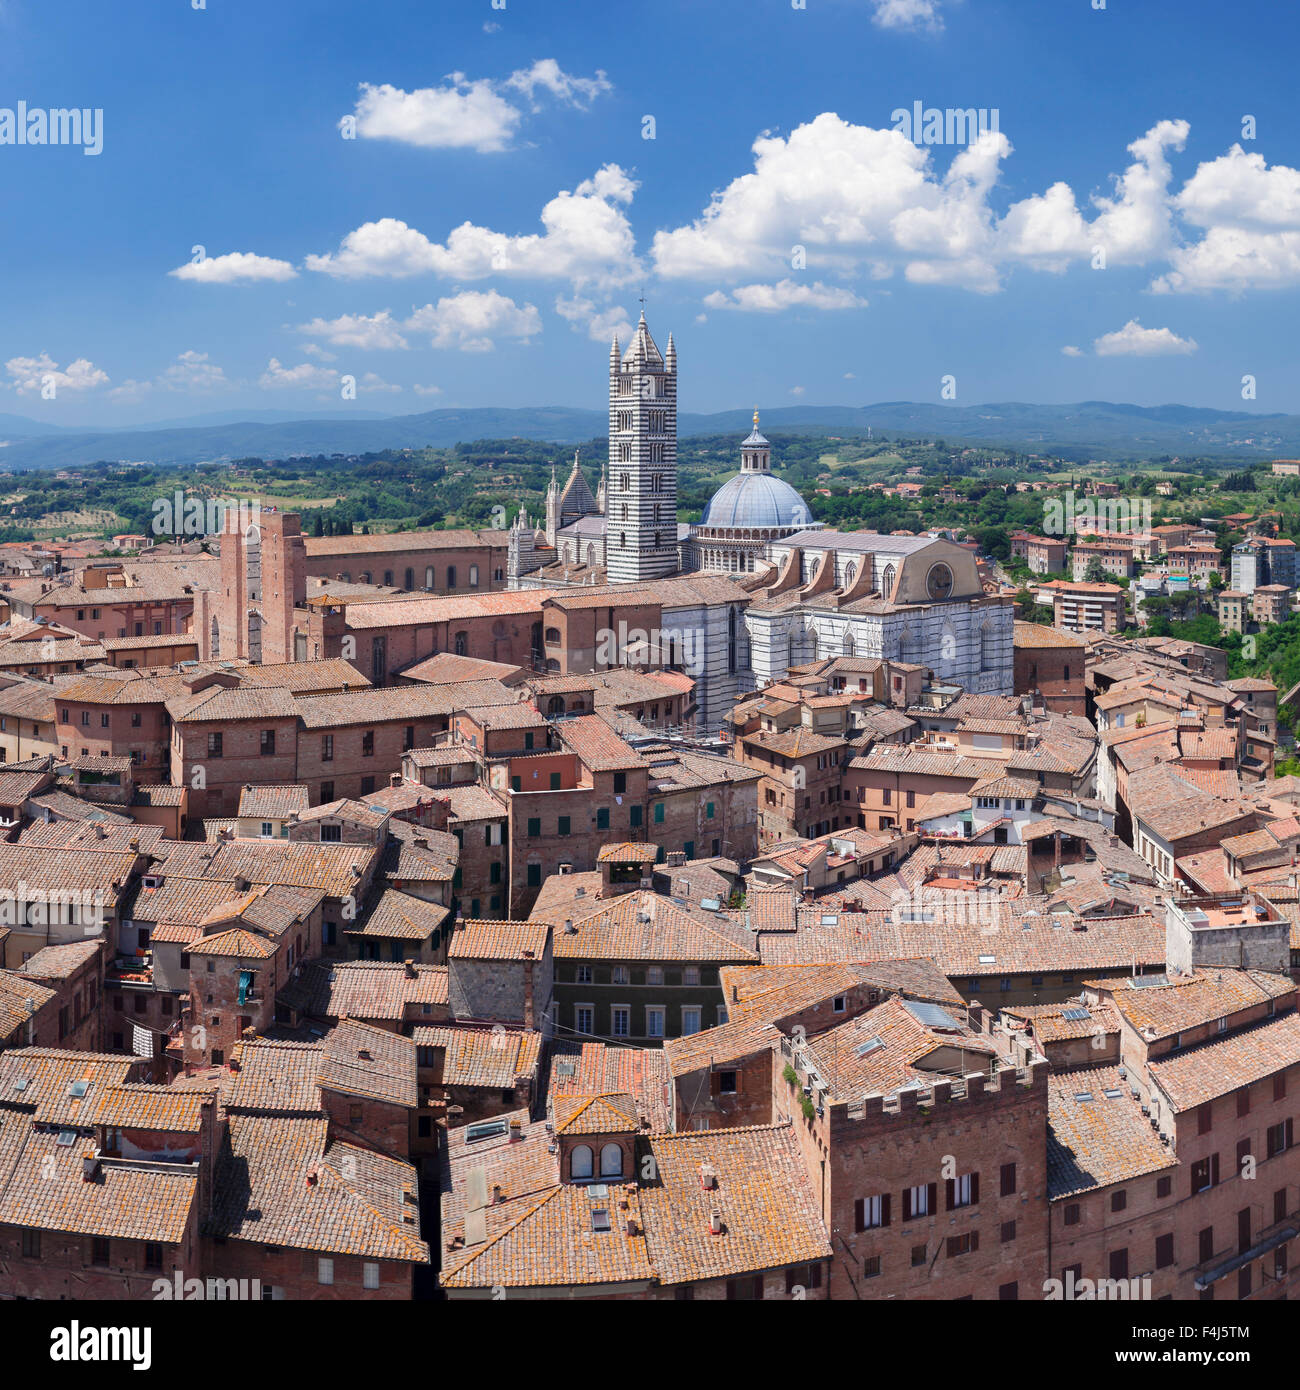 Old town with Santa Maria Assunta Cathedral, Siena, UNESCO World Heritage Site, Siena Province, Tuscany, Italy, Europe Stock Photo